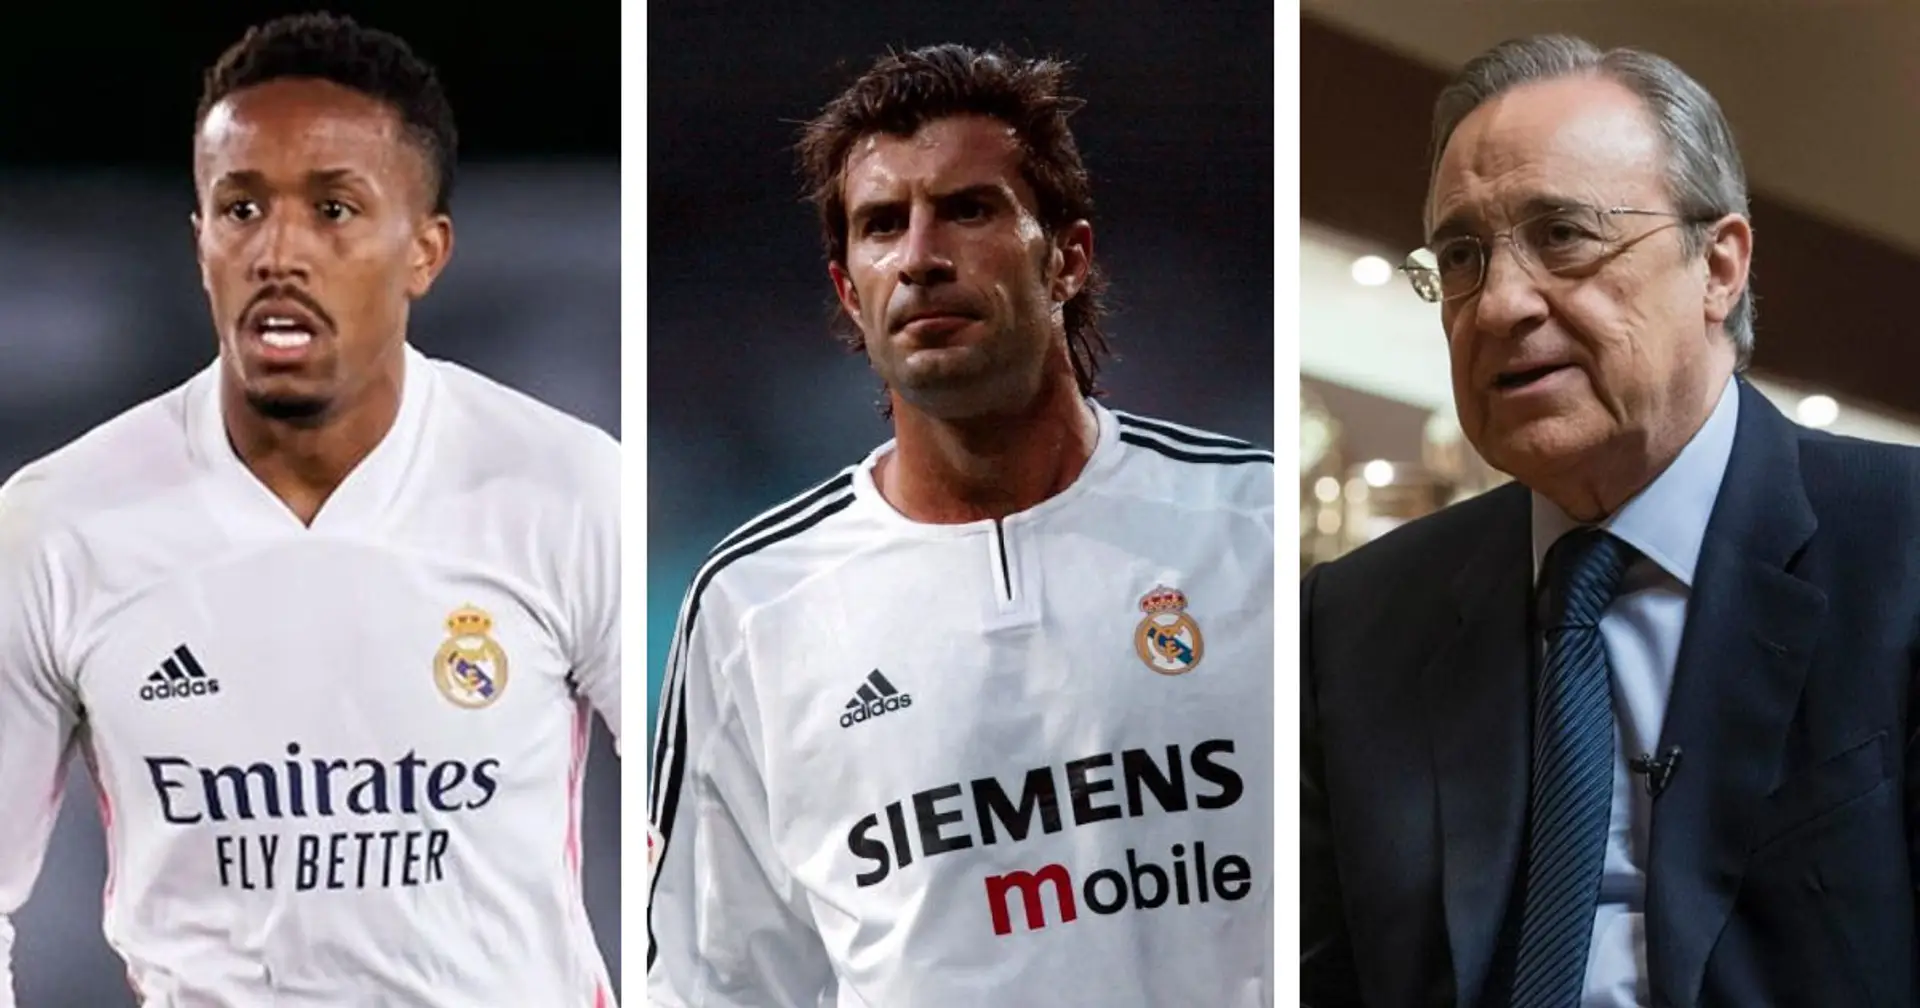 Perez calls Figo 'son of a b****' in latest leak & 3 more big stories you might've missed